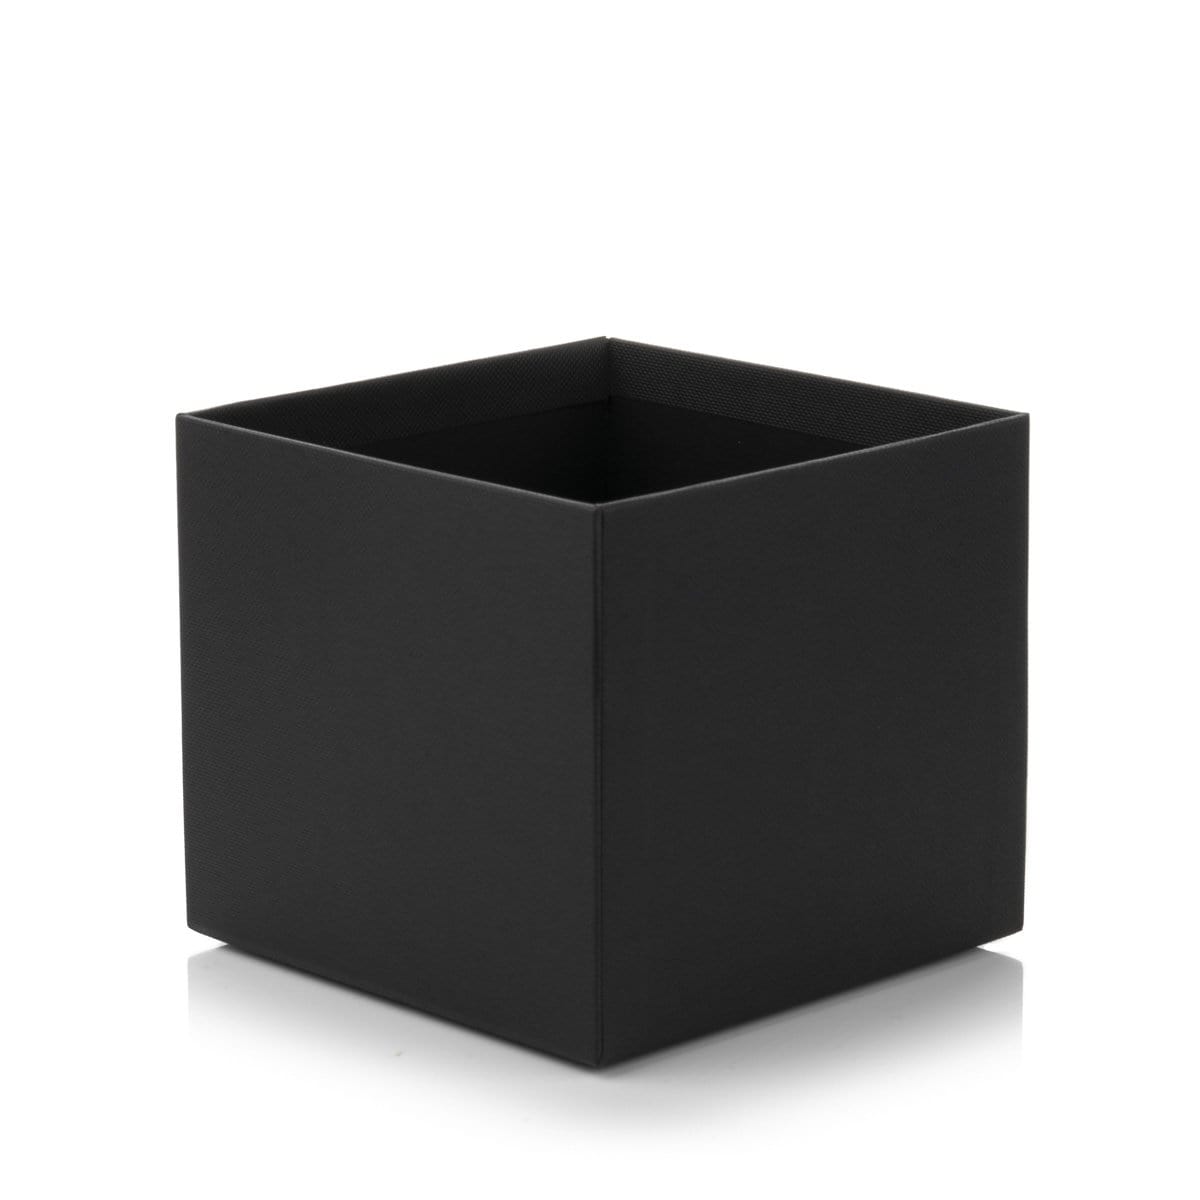 Candle Shack Candle Box Luxury Rigid Box for Tall 3-Wick Bowl - Black